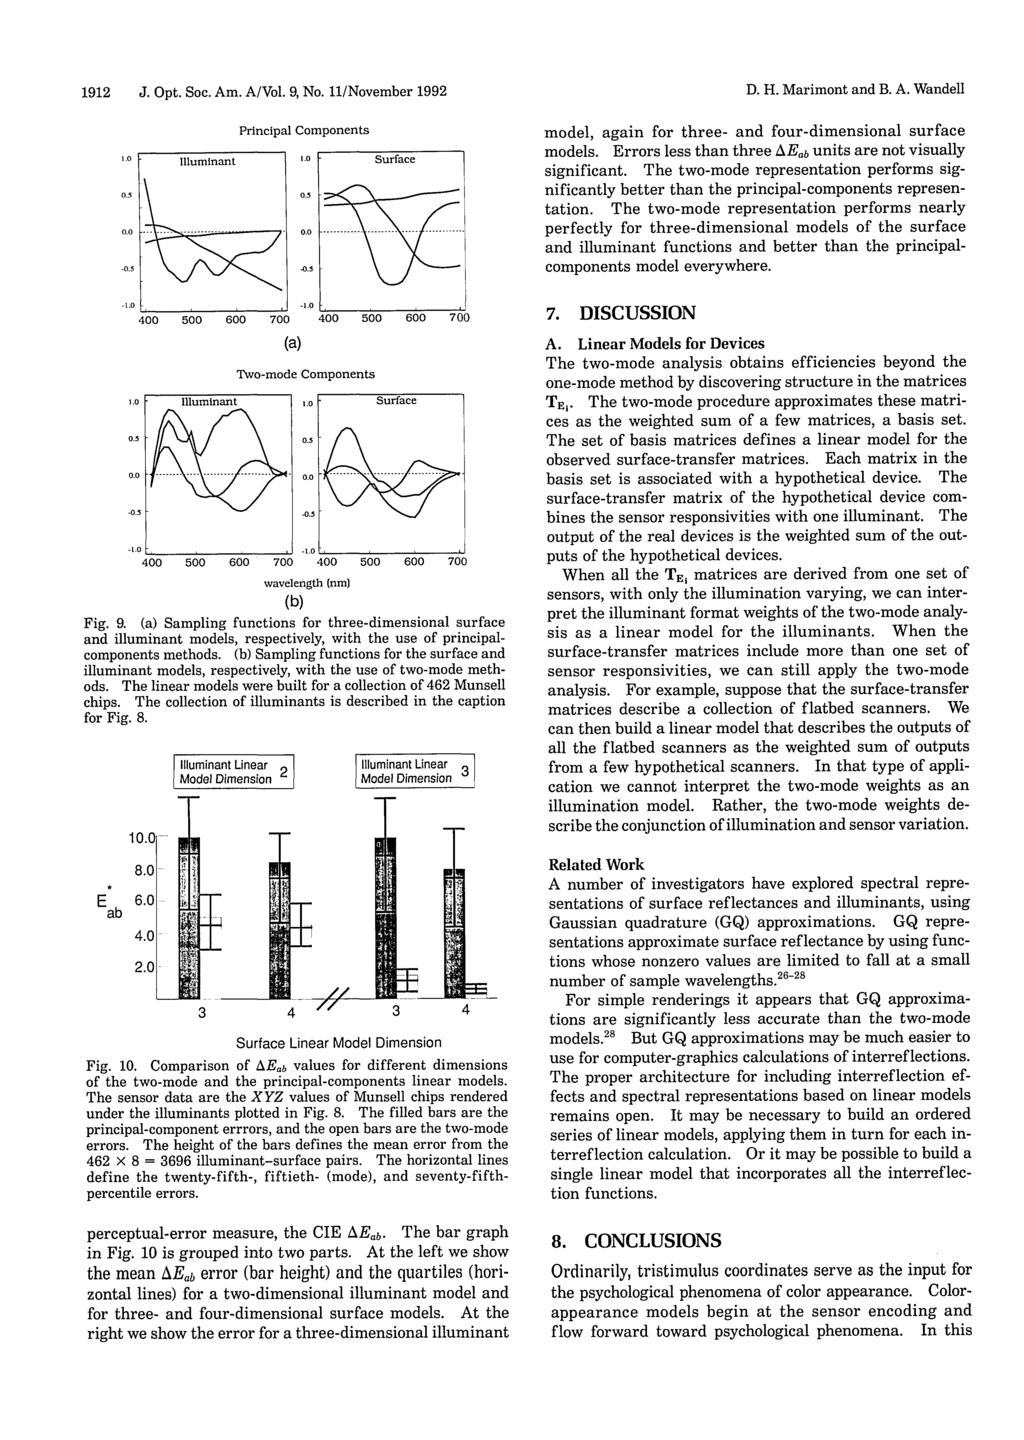 1912 J. Opt. Soc. Am. A/Vol. 9, No. 11/November 1992 D. H. Marimont and B. A. Wandell 10..0 Principal Components 1.0 - Surface model, again for three- and four-dimensional surface models.